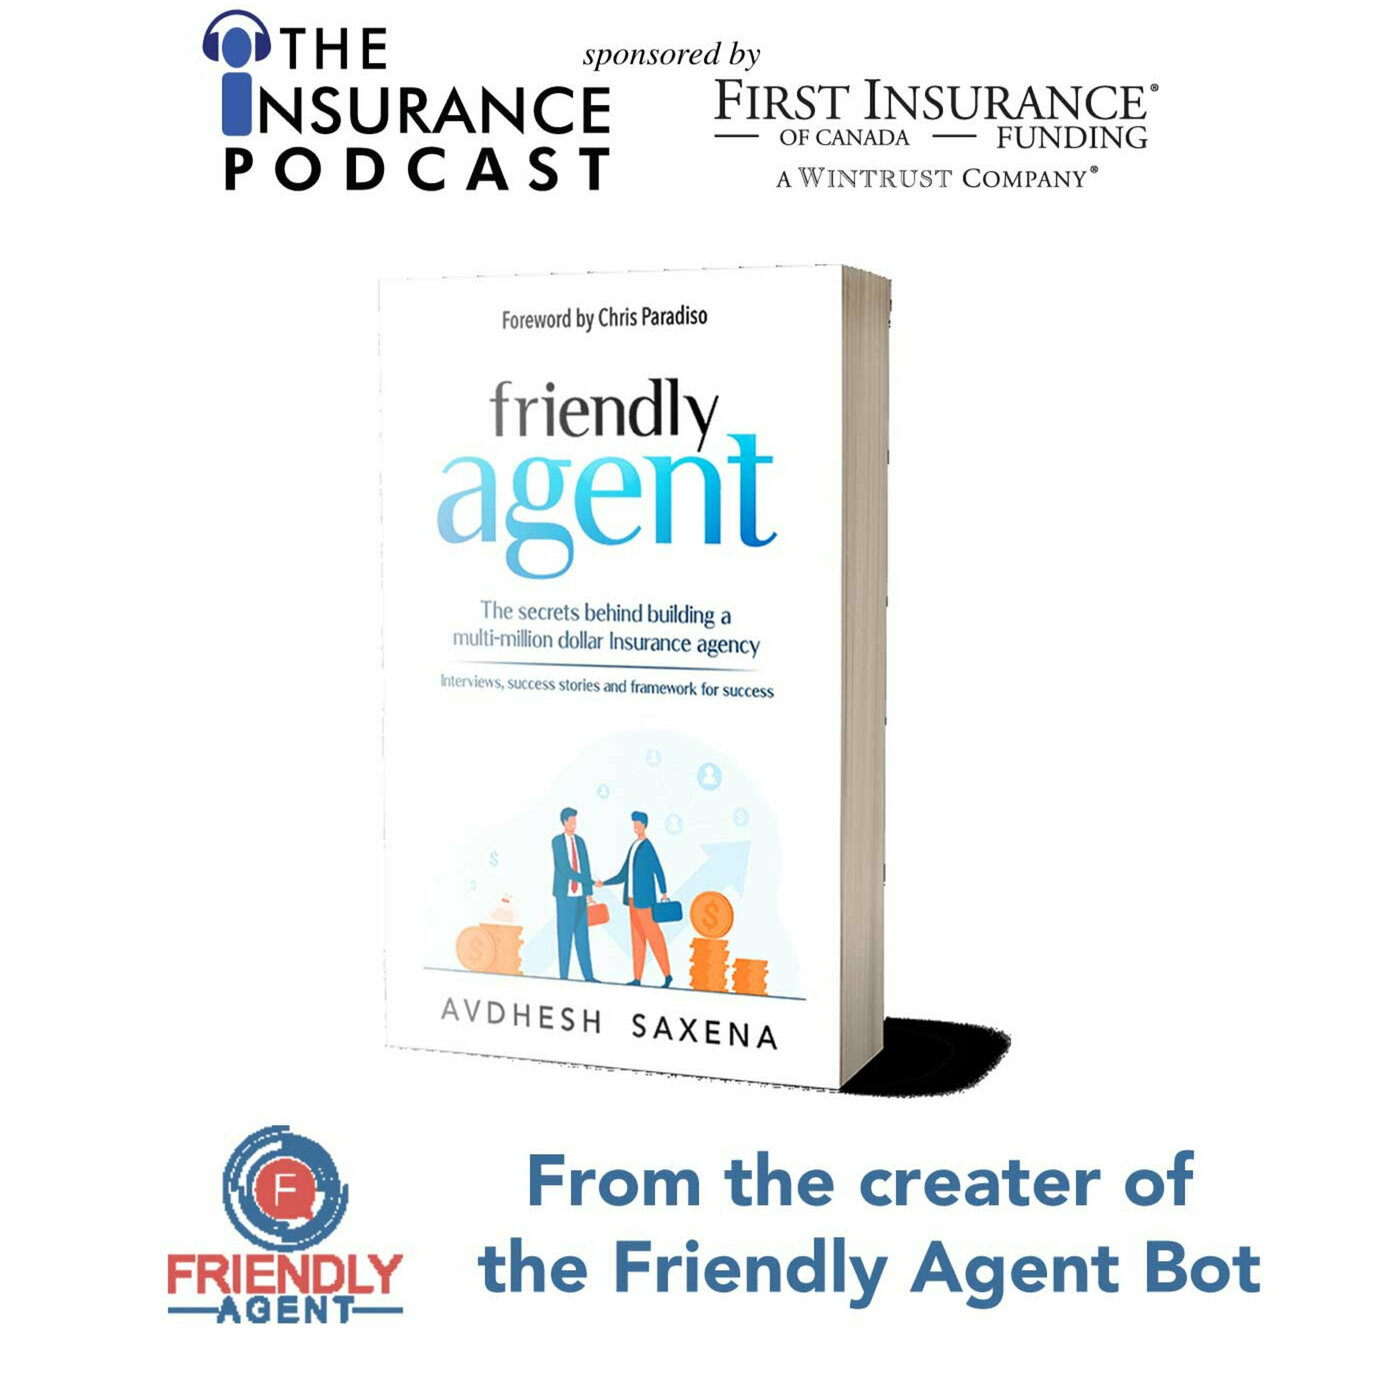 Friendly Agent Book- How to build a successful agency Image